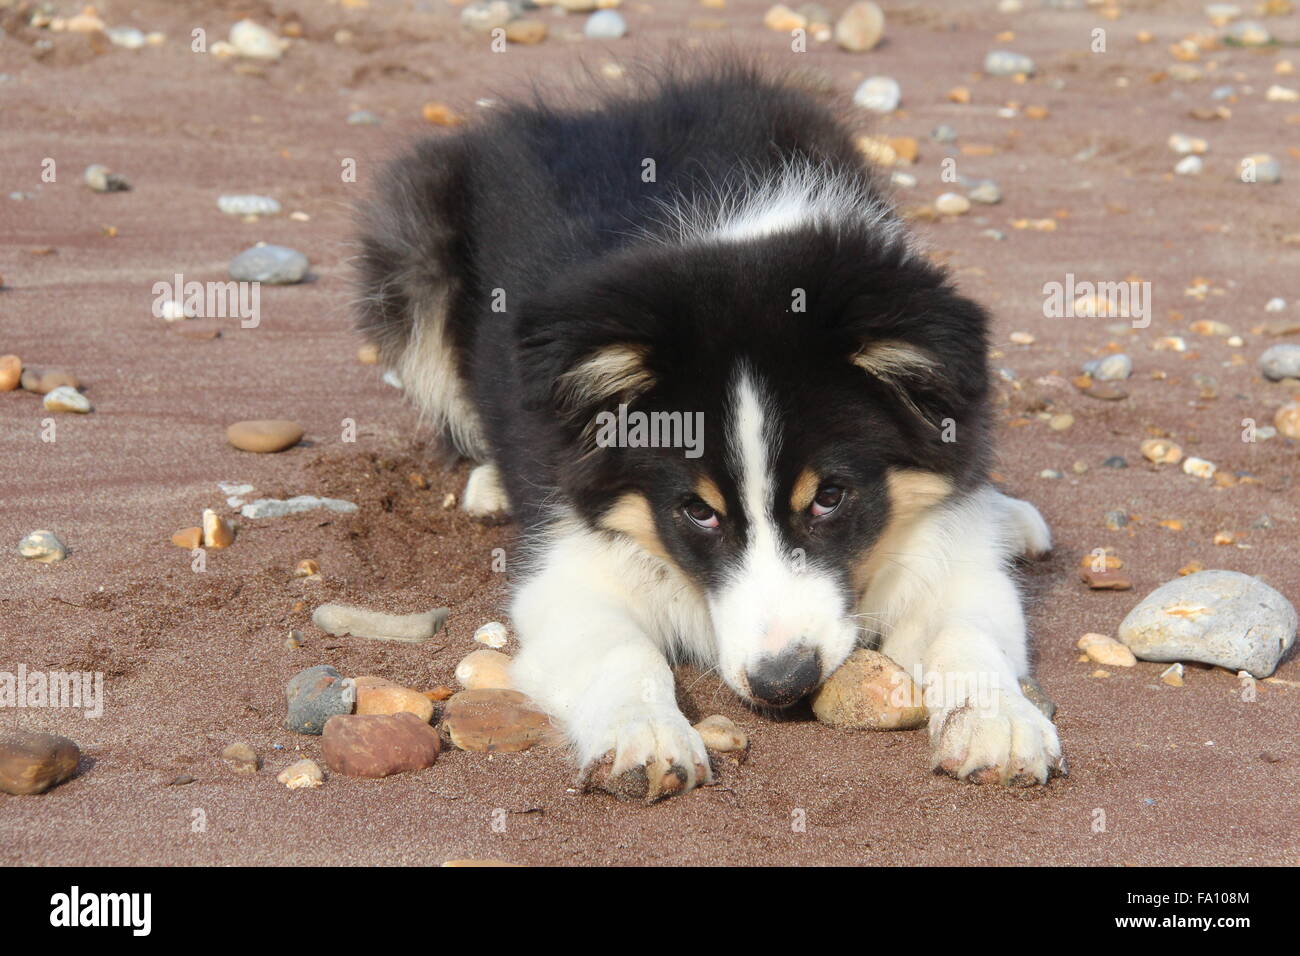 A bright picture of a cheeky-looking puppy Collie dog playing in the sand and stones on a beach Stock Photo